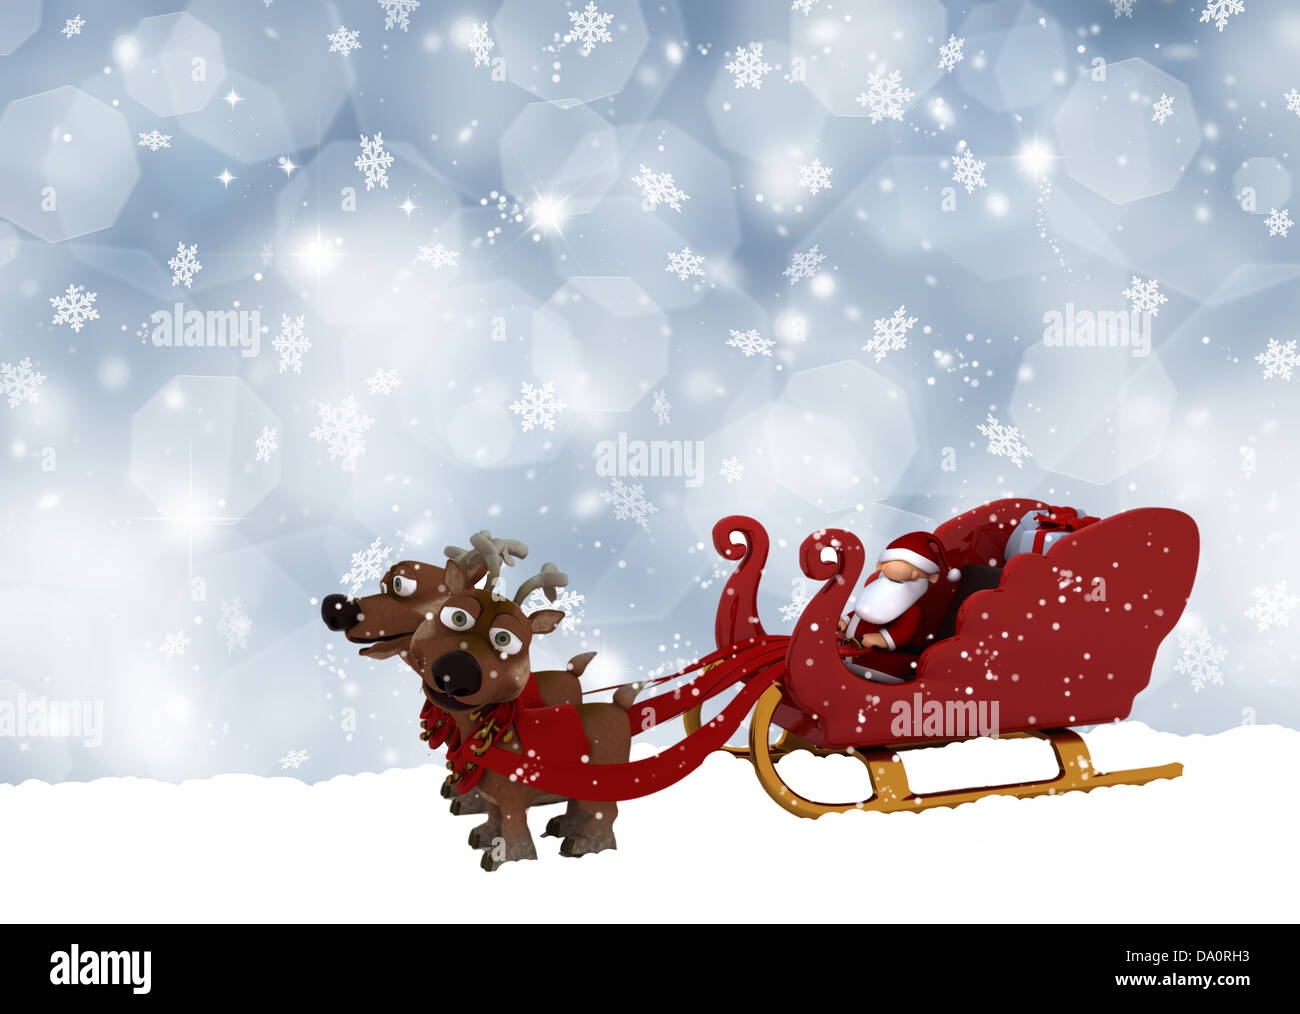 Cute Santa Claus and his reindeers on a snowflake background Stock Photo